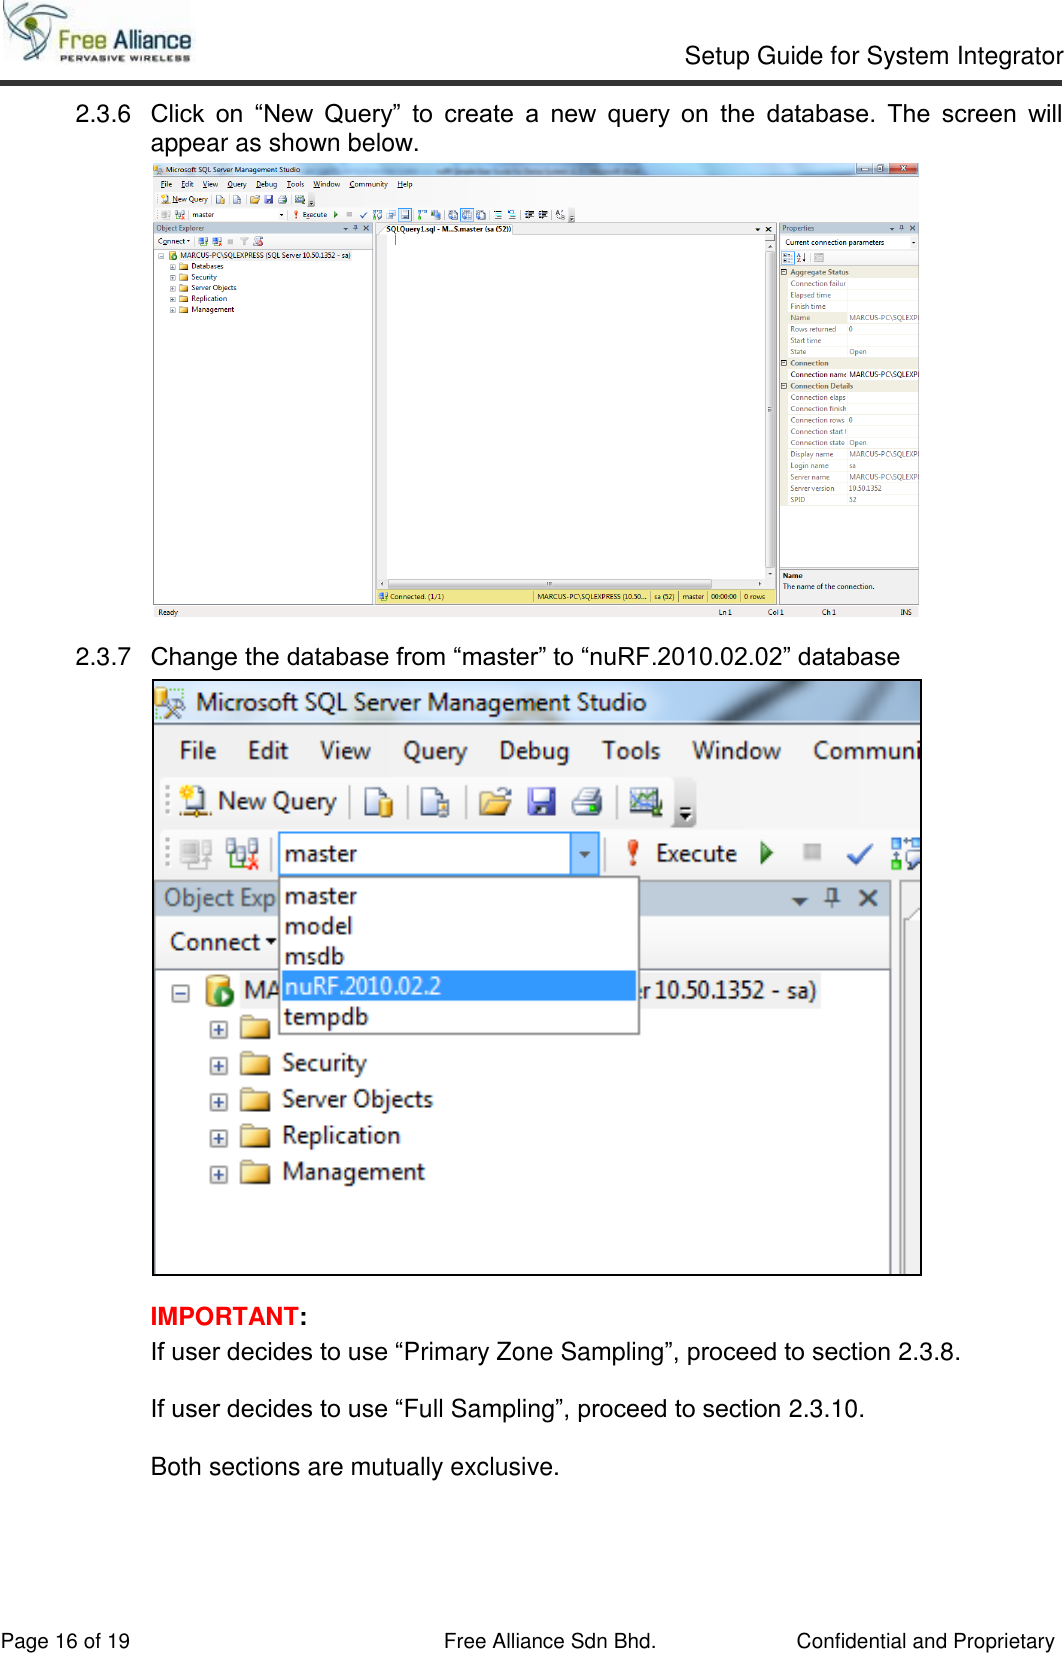     Setup Guide for System Integrator                                                                                                   Page 16 of 19 Free Alliance Sdn Bhd.             Confidential and Proprietary 2.3.6  Click  on  “New  Query”  to  create  a  new  query  on  the  database.  The  screen  will appear as shown below.  2.3.7  Change the database from “master” to “nuRF.2010.02.02” database  IMPORTANT:  If user decides to use “Primary Zone Sampling”, proceed to section 2.3.8.  If user decides to use “Full Sampling”, proceed to section 2.3.10.  Both sections are mutually exclusive.    